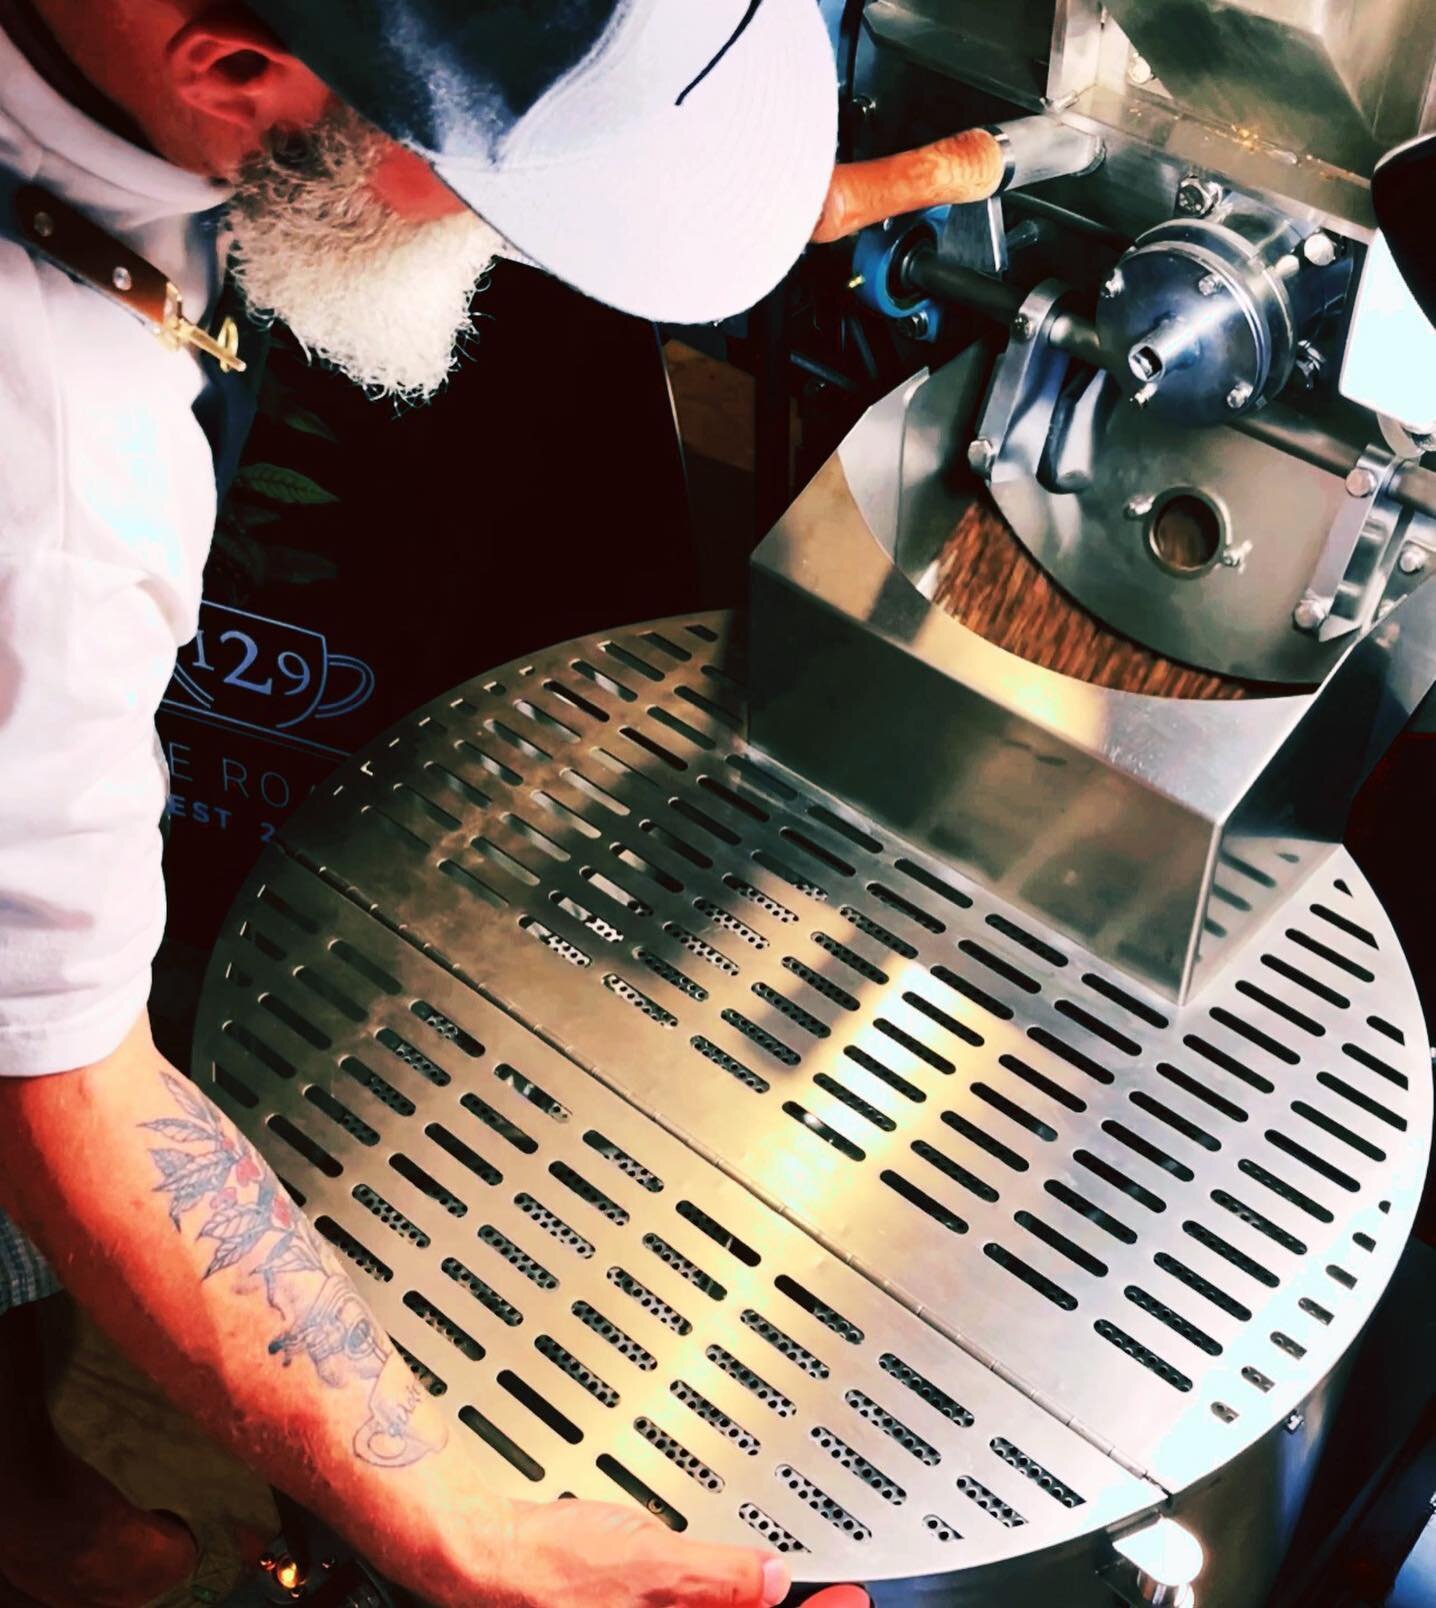 One of the most satisfying times in the coffee roasting process. #craftcoffeeroasters #craftcoffee #coffee #craftcoffeeroaster #specialtycoffeeroaster #specialtycoffee #coffeeroasterslife #roastingcoffeedaily #roastingcoffee #coffeepeople #coffeepass